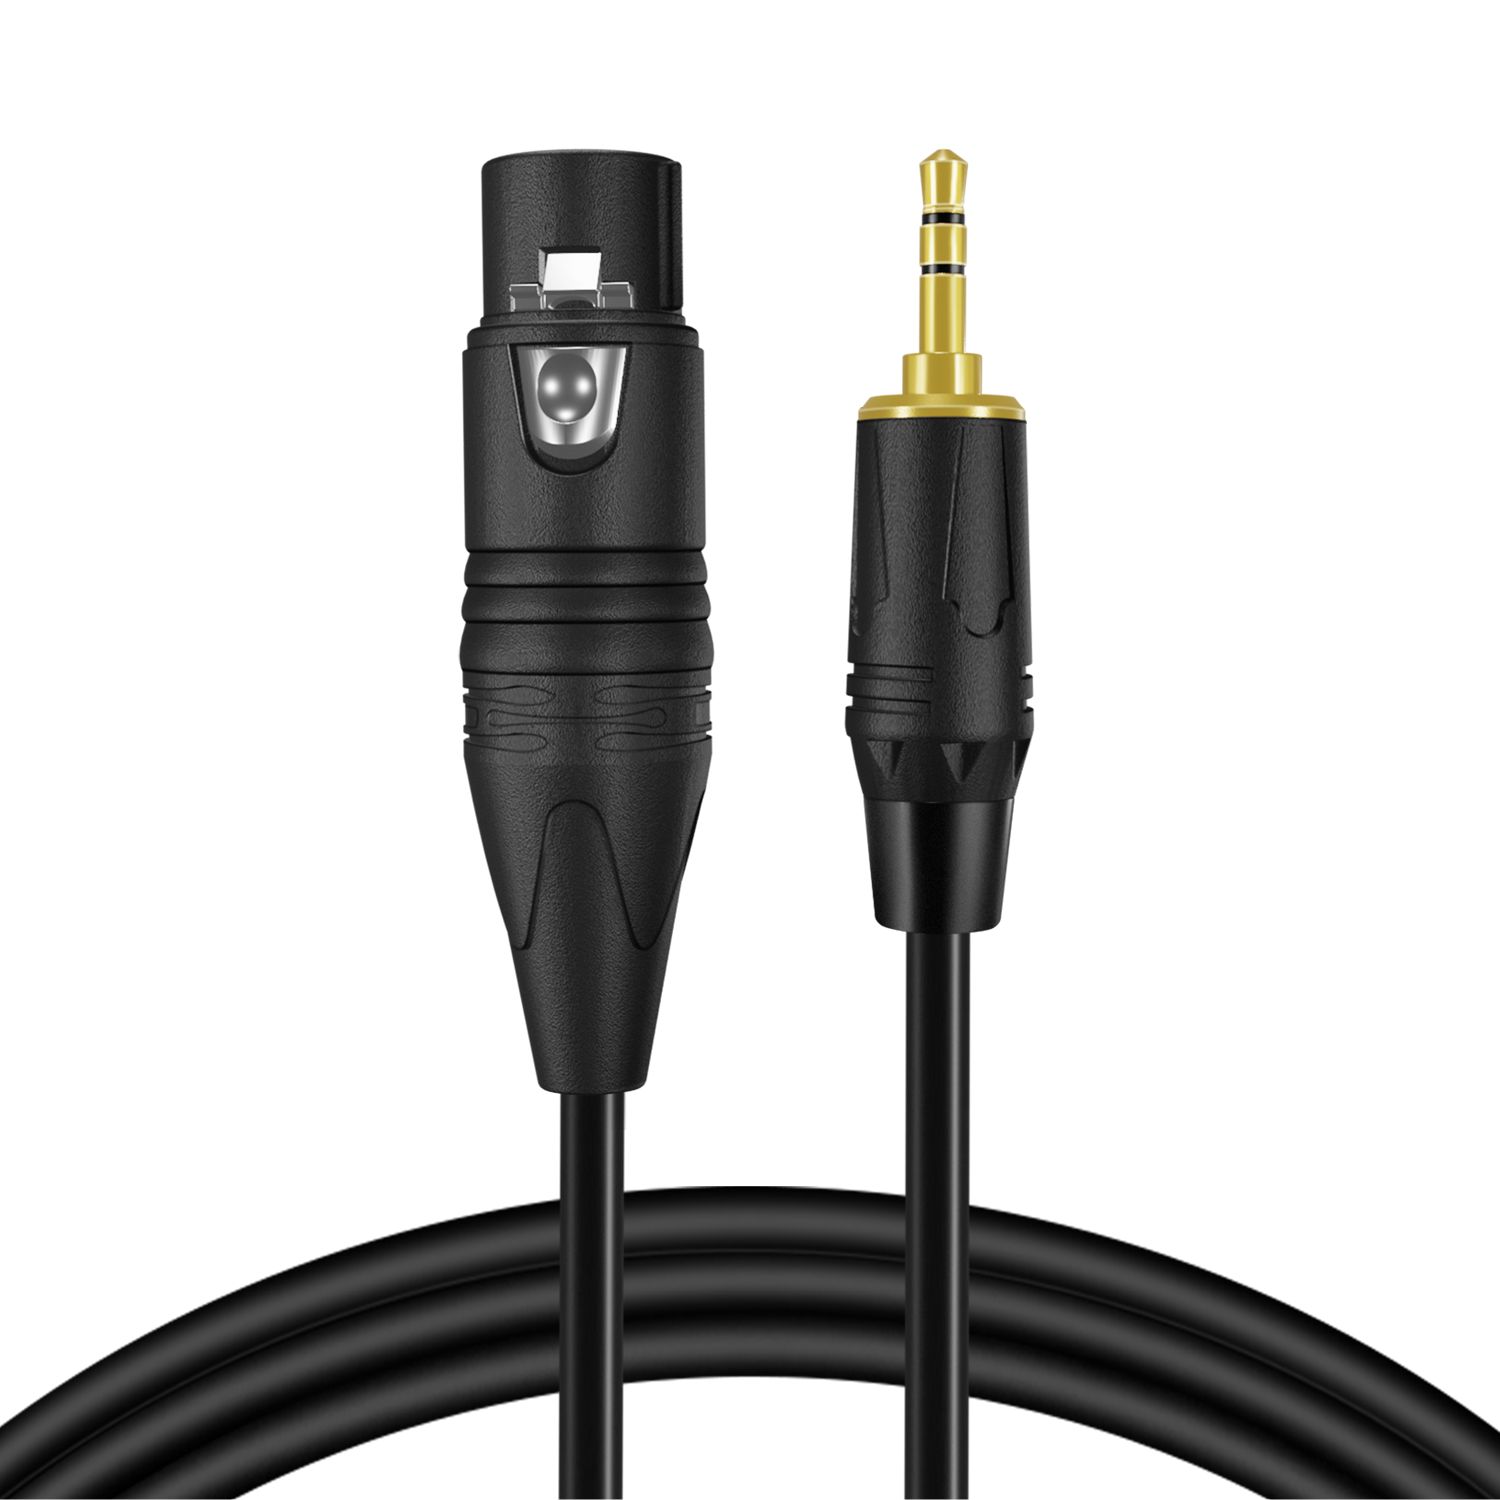 What You Get - 1x 6 ft Balanced Female XLR to 3.5mm Cable. Built from the highest quality materials, with additional flexibility and durability, a long operating life, and the best audio quality